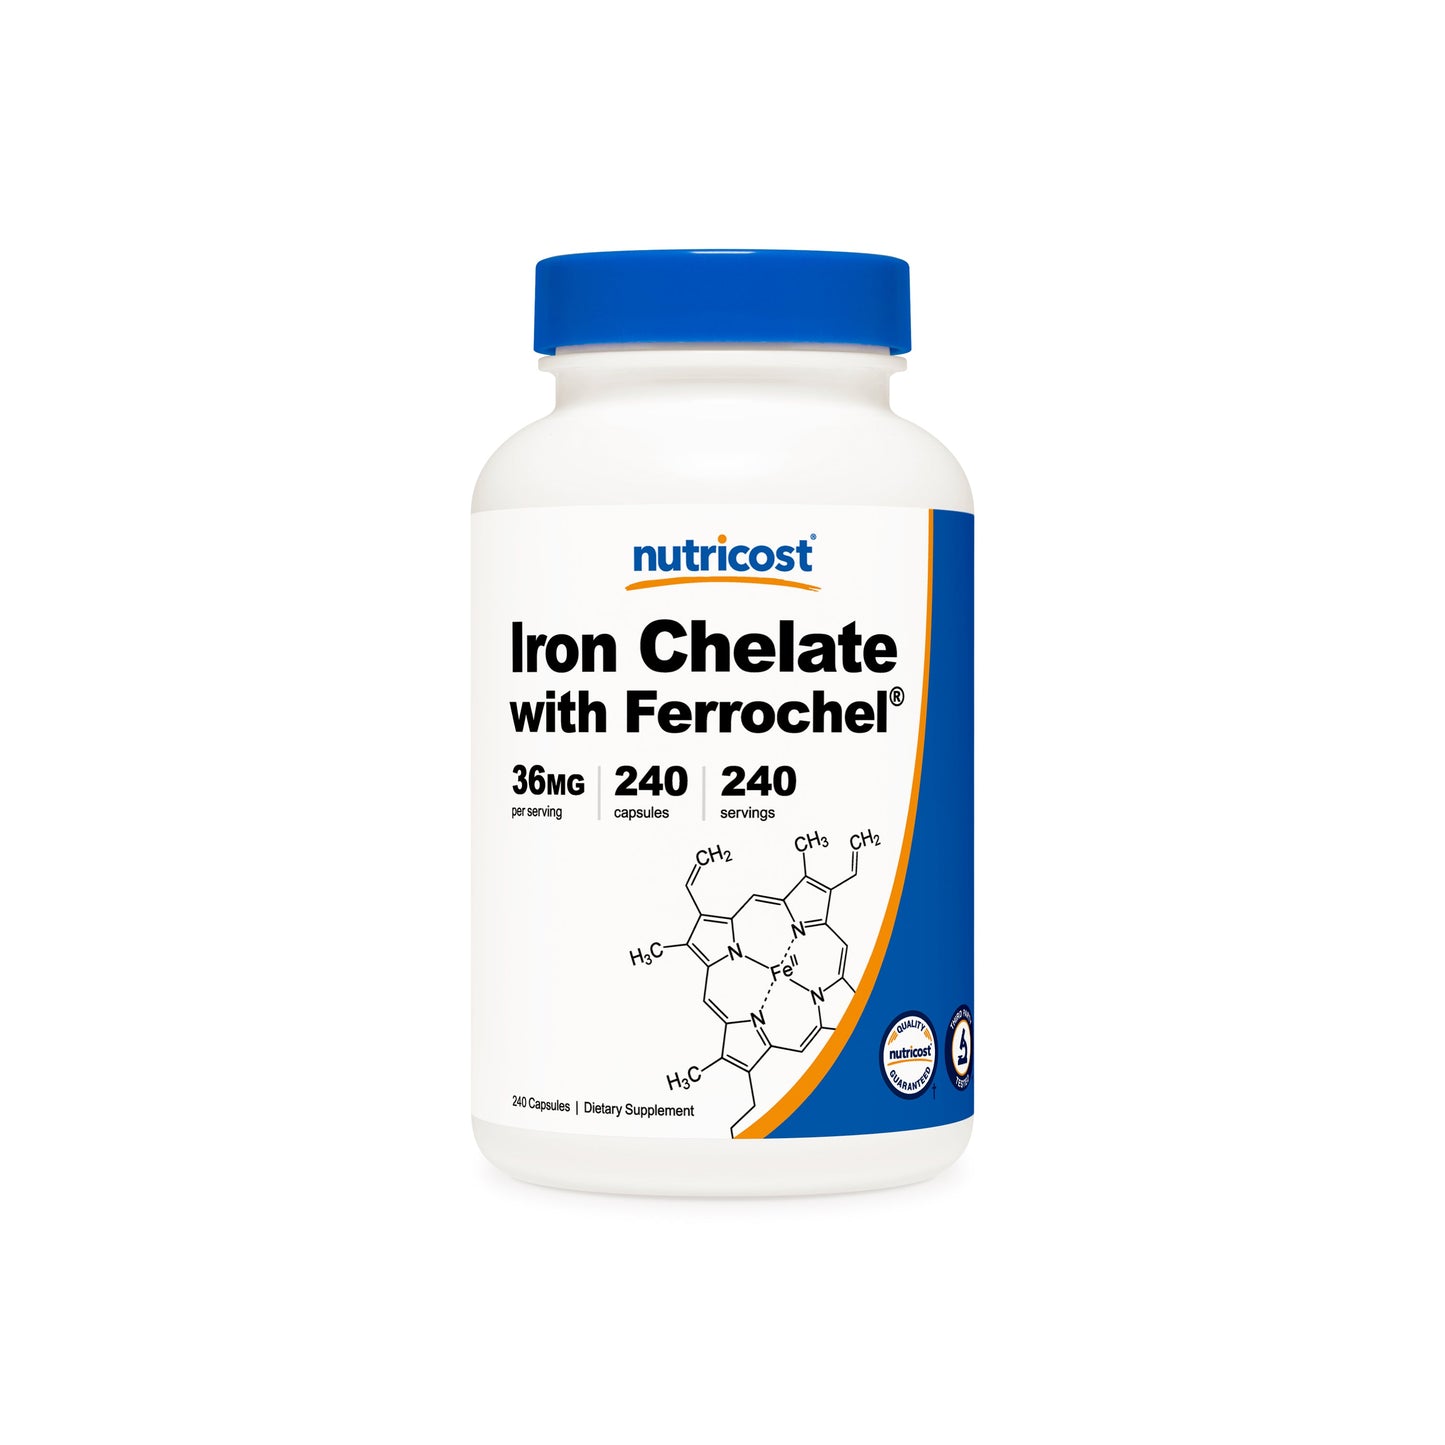 Nutricost Iron Chelate from Ferrochel Capsules